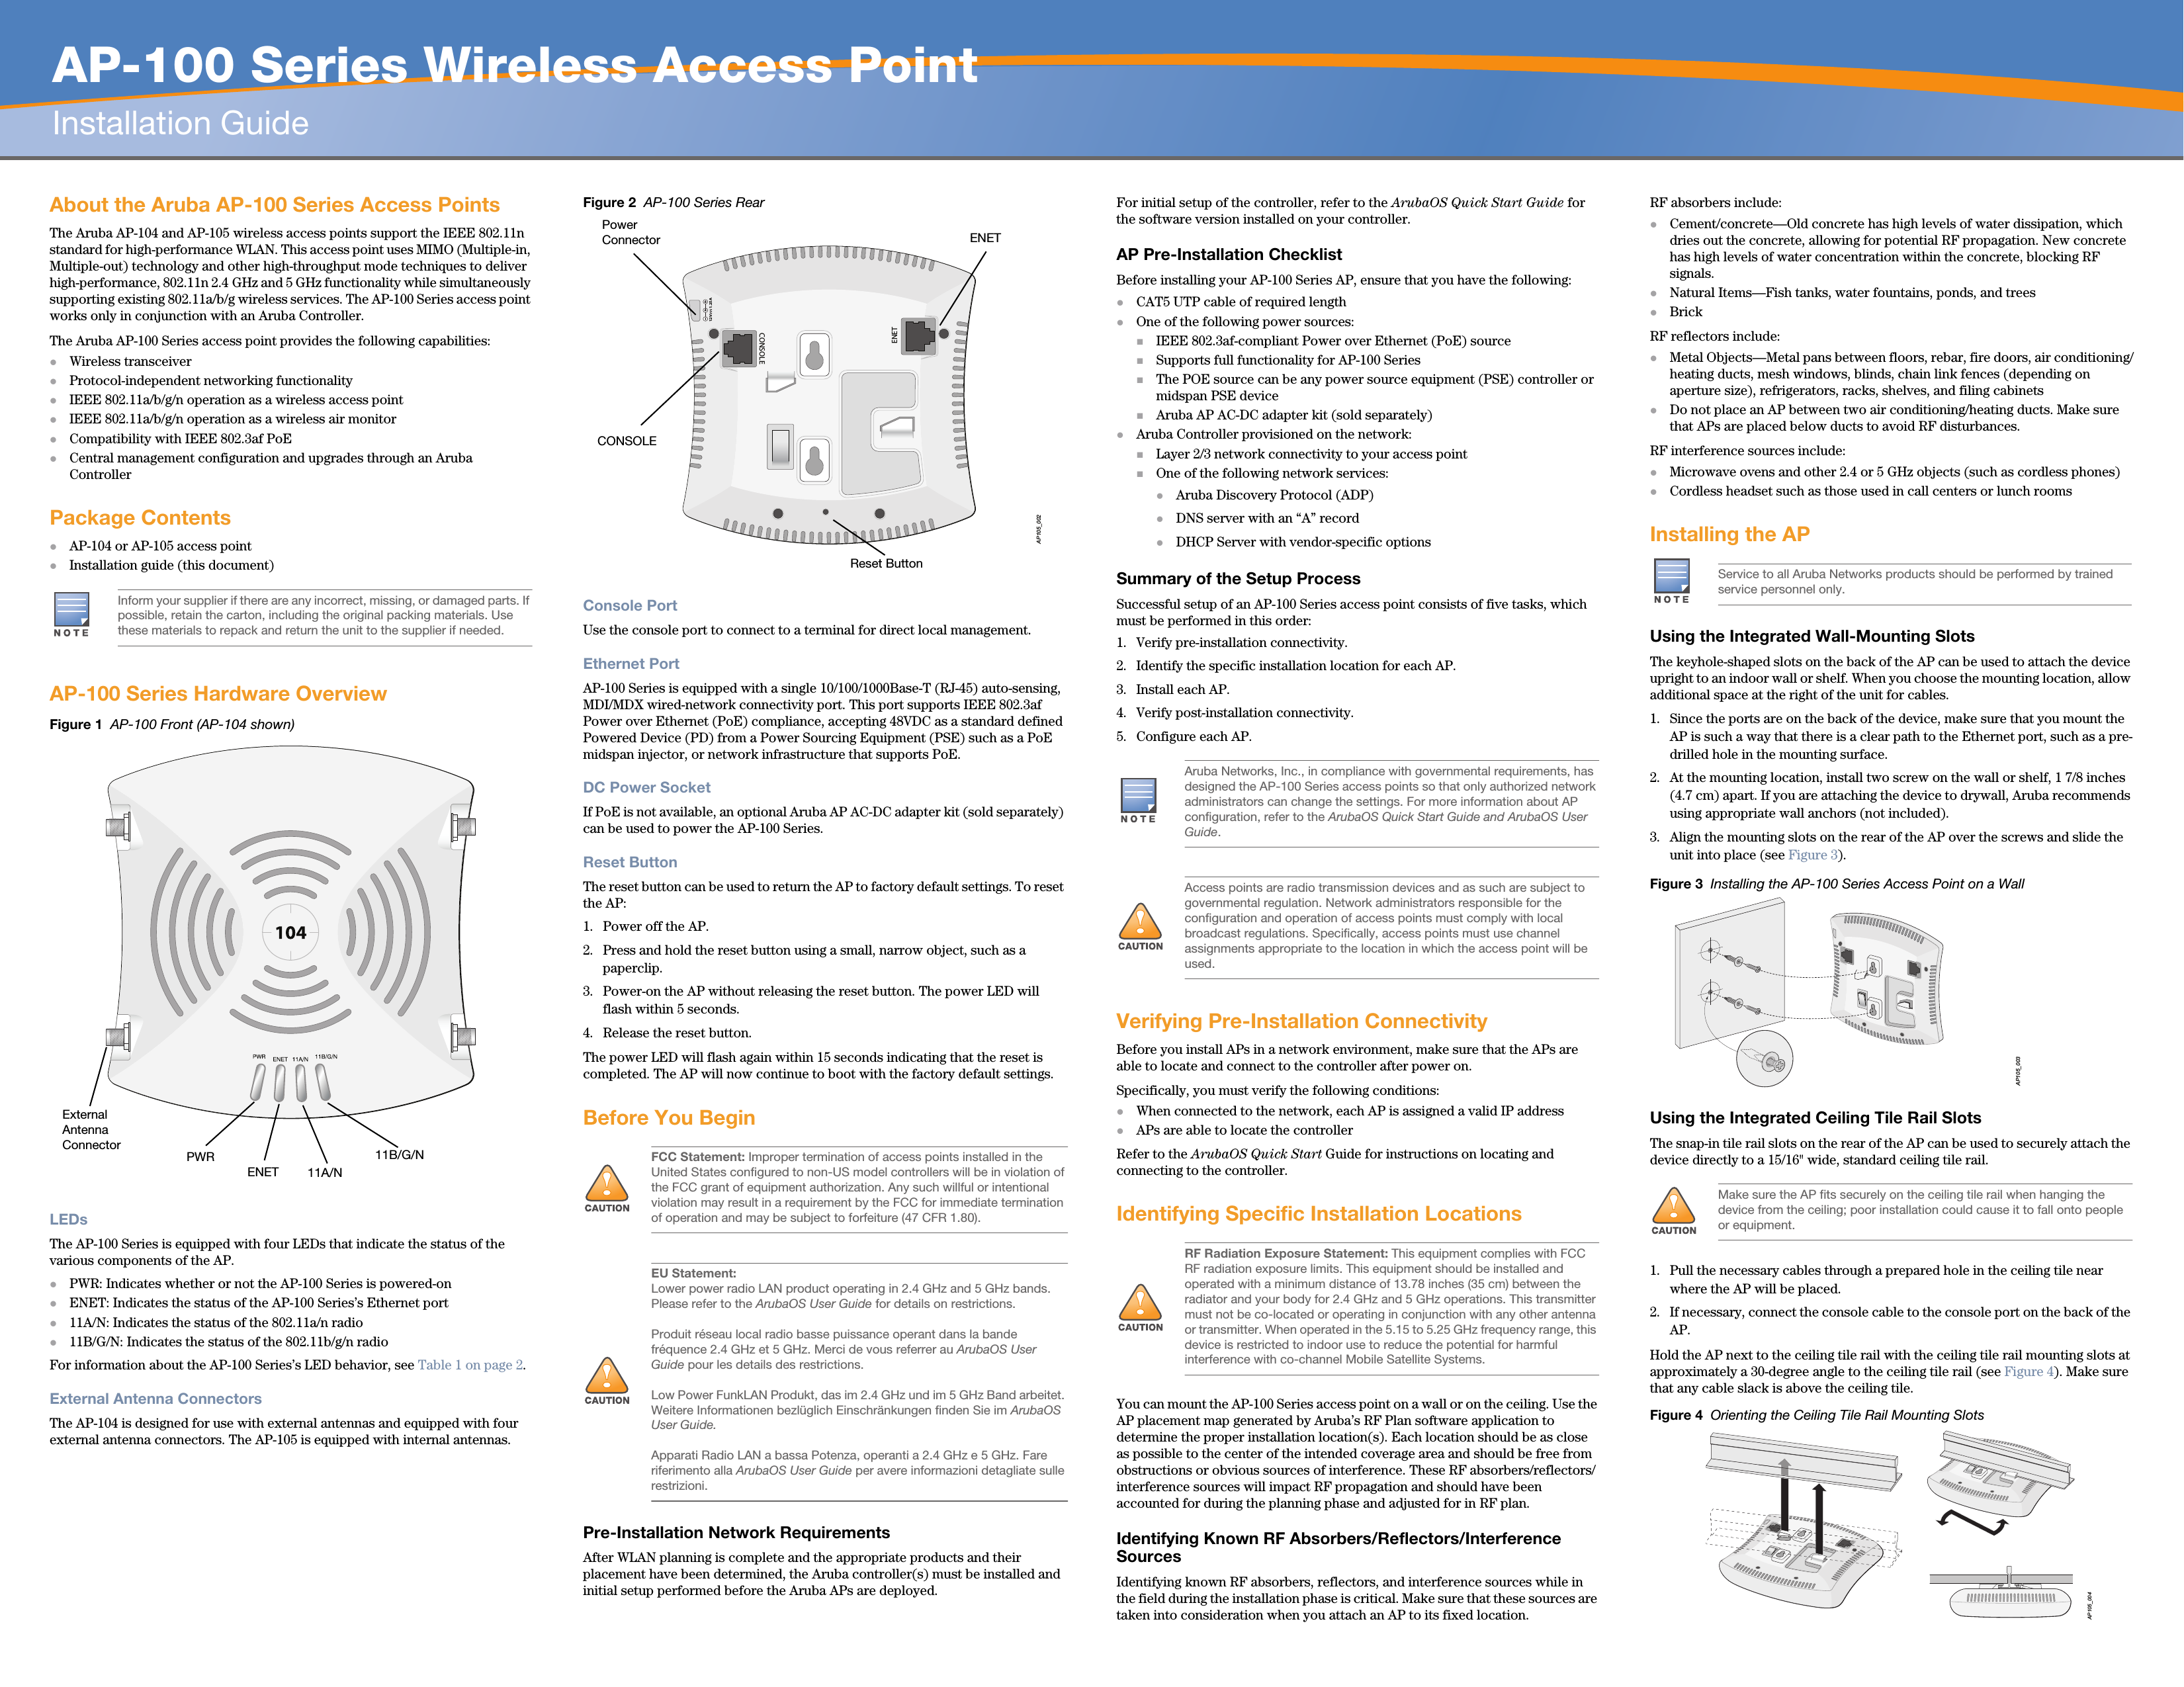   AP-100 Series Wireless Access PointInstallation GuideAbout the Aruba AP-100 Series Access PointsThe Aruba AP-104 and AP-105 wireless access points support the IEEE 802.11n standard for high-performance WLAN. This access point uses MIMO (Multiple-in, Multiple-out) technology and other high-throughput mode techniques to deliver high-performance, 802.11n 2.4 GHz and 5 GHz functionality while simultaneously supporting existing 802.11a/b/g wireless services. The AP-100 Series access point works only in conjunction with an Aruba Controller.The Aruba AP-100 Series access point provides the following capabilities:Wireless transceiverProtocol-independent networking functionalityIEEE 802.11a/b/g/n operation as a wireless access pointIEEE 802.11a/b/g/n operation as a wireless air monitorCompatibility with IEEE 802.3af PoE Central management configuration and upgrades through an Aruba ControllerPackage ContentsAP-104 or AP-105 access point Installation guide (this document)AP-100 Series Hardware OverviewFigure 1  AP-100 Front (AP-104 shown)LEDsThe AP-100 Series is equipped with four LEDs that indicate the status of the various components of the AP.PWR: Indicates whether or not the AP-100 Series is powered-onENET: Indicates the status of the AP-100 Series’s Ethernet port11A/N: Indicates the status of the 802.11a/n radio11B/G/N: Indicates the status of the 802.11b/g/n radioFor information about the AP-100 Series’s LED behavior, see Table 1 on page 2.External Antenna ConnectorsThe AP-104 is designed for use with external antennas and equipped with four external antenna connectors. The AP-105 is equipped with internal antennas.Figure 2  AP-100 Series RearConsole PortUse the console port to connect to a terminal for direct local management.Ethernet PortAP-100 Series is equipped with a single 10/100/1000Base-T (RJ-45) auto-sensing, MDI/MDX wired-network connectivity port. This port supports IEEE 802.3af Power over Ethernet (PoE) compliance, accepting 48VDC as a standard defined Powered Device (PD) from a Power Sourcing Equipment (PSE) such as a PoE midspan injector, or network infrastructure that supports PoE.DC Power SocketIf PoE is not available, an optional Aruba AP AC-DC adapter kit (sold separately) can be used to power the AP-100 Series. Reset ButtonThe reset button can be used to return the AP to factory default settings. To reset the AP:1. Power off the AP.2. Press and hold the reset button using a small, narrow object, such as a paperclip.3. Power-on the AP without releasing the reset button. The power LED will flash within 5 seconds.4. Release the reset button.The power LED will flash again within 15 seconds indicating that the reset is completed. The AP will now continue to boot with the factory default settings.Before You BeginPre-Installation Network RequirementsAfter WLAN planning is complete and the appropriate products and their placement have been determined, the Aruba controller(s) must be installed and initial setup performed before the Aruba APs are deployed.For initial setup of the controller, refer to the ArubaOS Quick Start Guide for the software version installed on your controller.AP Pre-Installation ChecklistBefore installing your AP-100 Series AP, ensure that you have the following:CAT5 UTP cable of required lengthOne of the following power sources:IEEE 802.3af-compliant Power over Ethernet (PoE) sourceSupports full functionality for AP-100 SeriesThe POE source can be any power source equipment (PSE) controller or midspan PSE deviceAruba AP AC-DC adapter kit (sold separately)Aruba Controller provisioned on the network:Layer 2/3 network connectivity to your access pointOne of the following network services:Aruba Discovery Protocol (ADP)DNS server with an “A” recordDHCP Server with vendor-specific optionsSummary of the Setup ProcessSuccessful setup of an AP-100 Series access point consists of five tasks, which must be performed in this order:1. Verify pre-installation connectivity.2. Identify the specific installation location for each AP.3. Install each AP.4. Verify post-installation connectivity.5. Configure each AP.Verifying Pre-Installation ConnectivityBefore you install APs in a network environment, make sure that the APs are able to locate and connect to the controller after power on.Specifically, you must verify the following conditions:When connected to the network, each AP is assigned a valid IP addressAPs are able to locate the controller Refer to the ArubaOS Quick Start Guide for instructions on locating and connecting to the controller.Identifying Specific Installation LocationsYou can mount the AP-100 Series access point on a wall or on the ceiling. Use the AP placement map generated by Aruba’s RF Plan software application to determine the proper installation location(s). Each location should be as close as possible to the center of the intended coverage area and should be free from obstructions or obvious sources of interference. These RF absorbers/reflectors/interference sources will impact RF propagation and should have been accounted for during the planning phase and adjusted for in RF plan.Identifying Known RF Absorbers/Reflectors/Interference SourcesIdentifying known RF absorbers, reflectors, and interference sources while in the field during the installation phase is critical. Make sure that these sources are taken into consideration when you attach an AP to its fixed location.RF absorbers include:Cement/concrete—Old concrete has high levels of water dissipation, which dries out the concrete, allowing for potential RF propagation. New concrete has high levels of water concentration within the concrete, blocking RF signals.Natural Items—Fish tanks, water fountains, ponds, and treesBrickRF reflectors include:Metal Objects—Metal pans between floors, rebar, fire doors, air conditioning/heating ducts, mesh windows, blinds, chain link fences (depending on aperture size), refrigerators, racks, shelves, and filing cabinetsDo not place an AP between two air conditioning/heating ducts. Make sure that APs are placed below ducts to avoid RF disturbances.RF interference sources include:Microwave ovens and other 2.4 or 5 GHz objects (such as cordless phones)Cordless headset such as those used in call centers or lunch roomsInstalling the APUsing the Integrated Wall-Mounting SlotsThe keyhole-shaped slots on the back of the AP can be used to attach the device upright to an indoor wall or shelf. When you choose the mounting location, allow additional space at the right of the unit for cables.1. Since the ports are on the back of the device, make sure that you mount the AP is such a way that there is a clear path to the Ethernet port, such as a pre-drilled hole in the mounting surface.2. At the mounting location, install two screw on the wall or shelf, 1 7/8 inches (4.7 cm) apart. If you are attaching the device to drywall, Aruba recommends using appropriate wall anchors (not included).3. Align the mounting slots on the rear of the AP over the screws and slide the unit into place (see Figure 3).Figure 3  Installing the AP-100 Series Access Point on a WallUsing the Integrated Ceiling Tile Rail SlotsThe snap-in tile rail slots on the rear of the AP can be used to securely attach the device directly to a 15/16&quot; wide, standard ceiling tile rail.1. Pull the necessary cables through a prepared hole in the ceiling tile near where the AP will be placed.2. If necessary, connect the console cable to the console port on the back of the AP.Hold the AP next to the ceiling tile rail with the ceiling tile rail mounting slots at approximately a 30-degree angle to the ceiling tile rail (see Figure 4). Make sure that any cable slack is above the ceiling tile.Figure 4  Orienting the Ceiling Tile Rail Mounting SlotsInform your supplier if there are any incorrect, missing, or damaged parts. If possible, retain the carton, including the original packing materials. Use these materials to repack and return the unit to the supplier if needed.PWRENET11B/G/N11A/NExternal Antenna Connector!FCC Statement: Improper termination of access points installed in the United States configured to non-US model controllers will be in violation of the FCC grant of equipment authorization. Any such willful or intentional violation may result in a requirement by the FCC for immediate termination of operation and may be subject to forfeiture (47 CFR 1.80).!EU Statement: Lower power radio LAN product operating in 2.4 GHz and 5 GHz bands. Please refer to the ArubaOS User Guide for details on restrictions.Produit réseau local radio basse puissance operant dans la bande fréquence 2.4 GHz et 5 GHz. Merci de vous referrer au ArubaOS User Guide pour les details des restrictions.Low Power FunkLAN Produkt, das im 2.4 GHz und im 5 GHz Band arbeitet. Weitere Informationen bezlüglich Einschränkungen finden Sie im ArubaOS User Guide.Apparati Radio LAN a bassa Potenza, operanti a 2.4 GHz e 5 GHz. Fare riferimento alla ArubaOS User Guide per avere informazioni detagliate sulle restrizioni.AP105_002CONSOLEENET12V       1.25ACONSOLEENETPower ConnectorReset ButtonAruba Networks, Inc., in compliance with governmental requirements, has designed the AP-100 Series access points so that only authorized network administrators can change the settings. For more information about AP configuration, refer to the ArubaOS Quick Start Guide and ArubaOS User Guide.!Access points are radio transmission devices and as such are subject to governmental regulation. Network administrators responsible for the configuration and operation of access points must comply with local broadcast regulations. Specifically, access points must use channel assignments appropriate to the location in which the access point will be used.!RF Radiation Exposure Statement: This equipment complies with FCC RF radiation exposure limits. This equipment should be installed and operated with a minimum distance of 13.78 inches (35 cm) between the radiator and your body for 2.4 GHz and 5 GHz operations. This transmitter must not be co-located or operating in conjunction with any other antenna or transmitter. When operated in the 5.15 to 5.25 GHz frequency range, this device is restricted to indoor use to reduce the potential for harmful interference with co-channel Mobile Satellite Systems.Service to all Aruba Networks products should be performed by trained service personnel only.!Make sure the AP fits securely on the ceiling tile rail when hanging the device from the ceiling; poor installation could cause it to fall onto people or equipment.AP105_003AP105_004